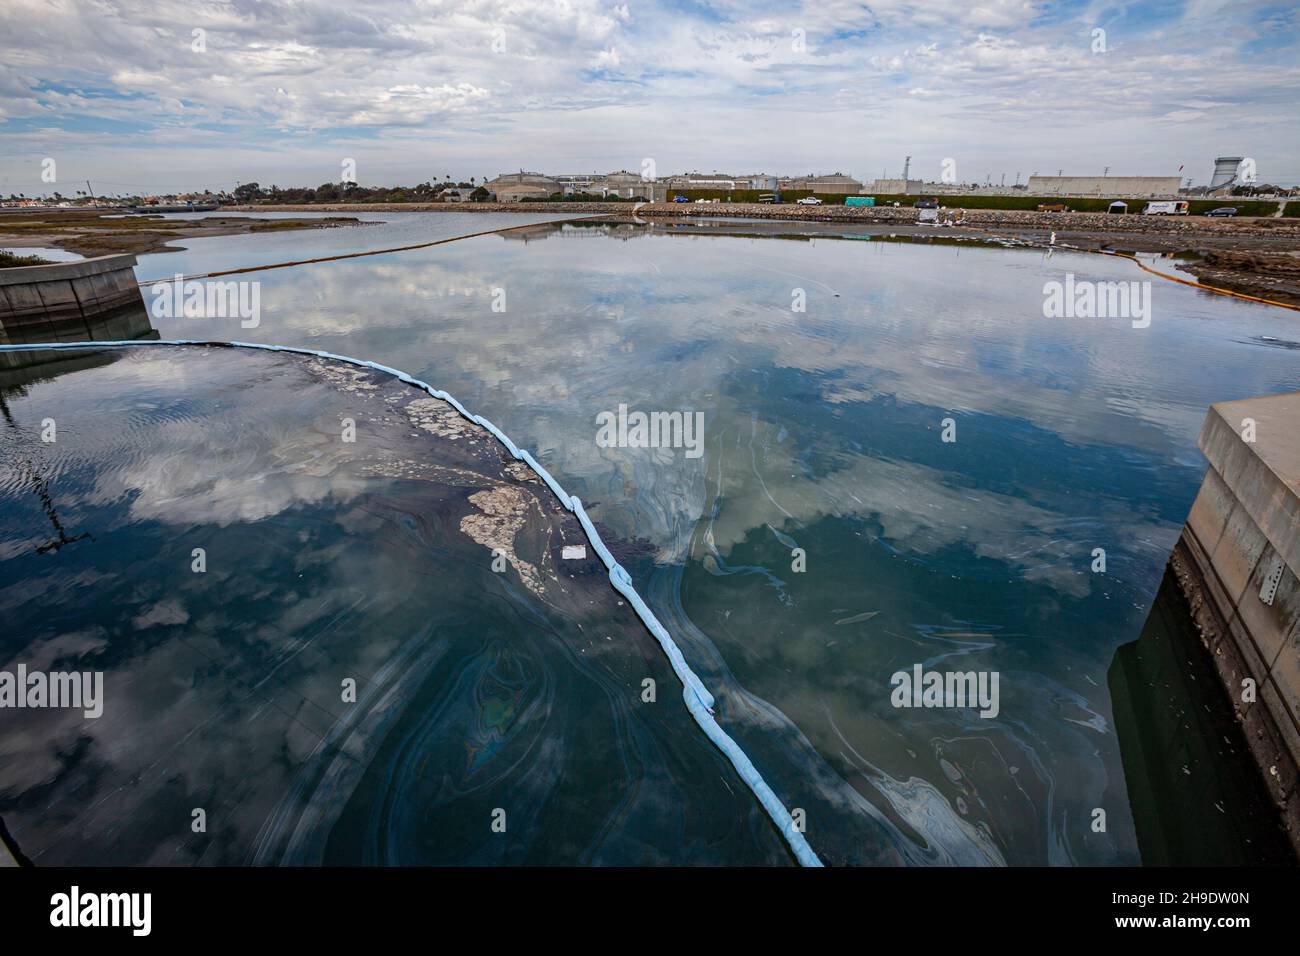 An oil slick in the Talbert Marsh near Huntington State Beach. An estimated 127,000 gallons of crude oil leaked from an oil derrick pipeline in the Ca Stock Photo